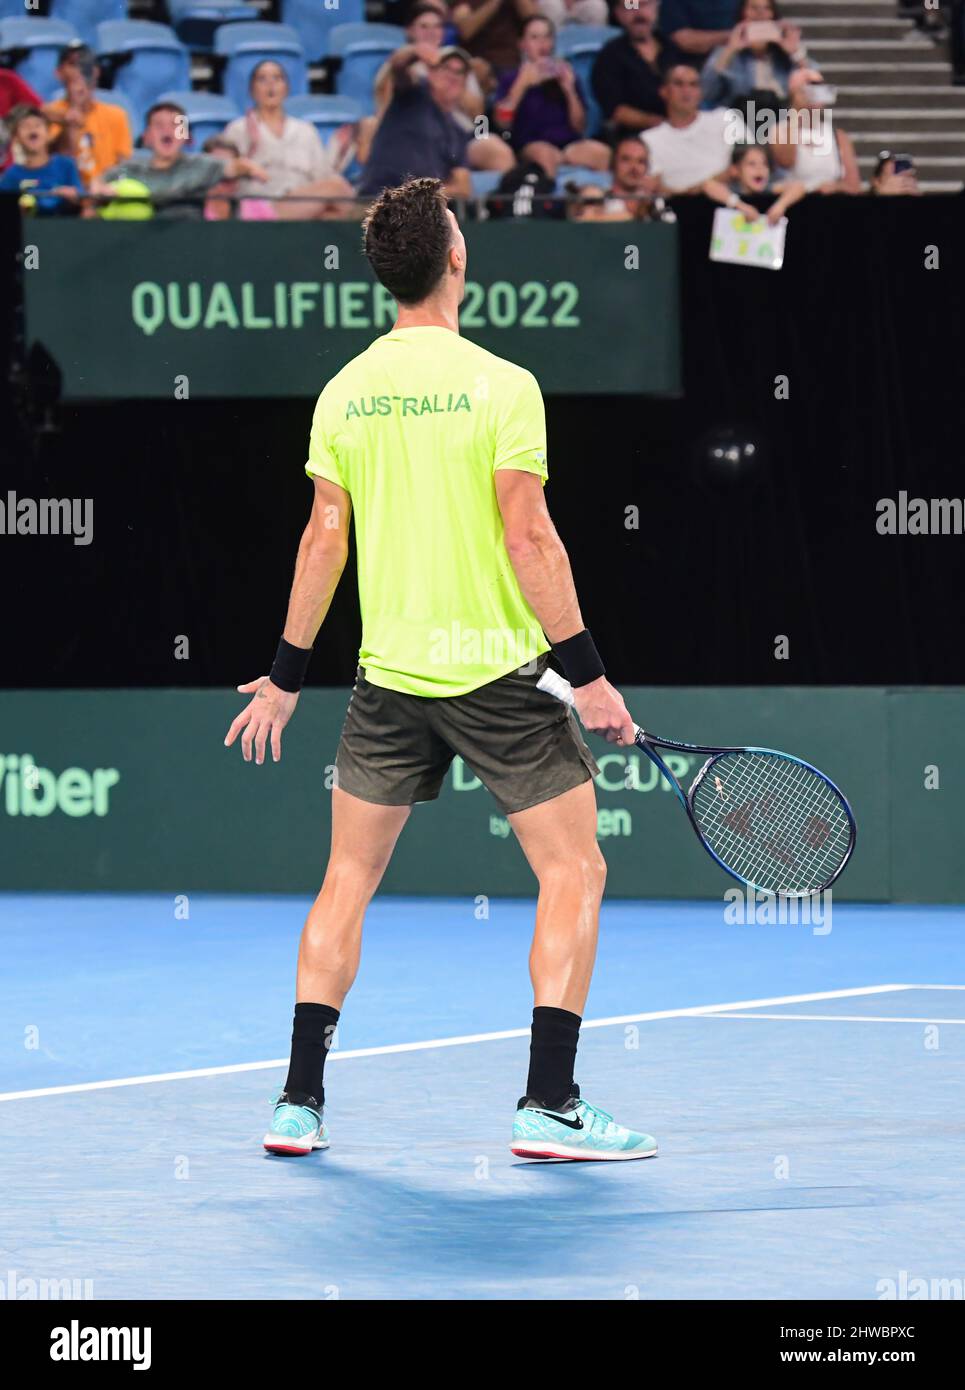 Thanasi Kokkinakis of Australia reacts during the 2022 Davis Cup Qualifying Round match against Zsombor Piros of Hungary at Ken Rosewell Stadium